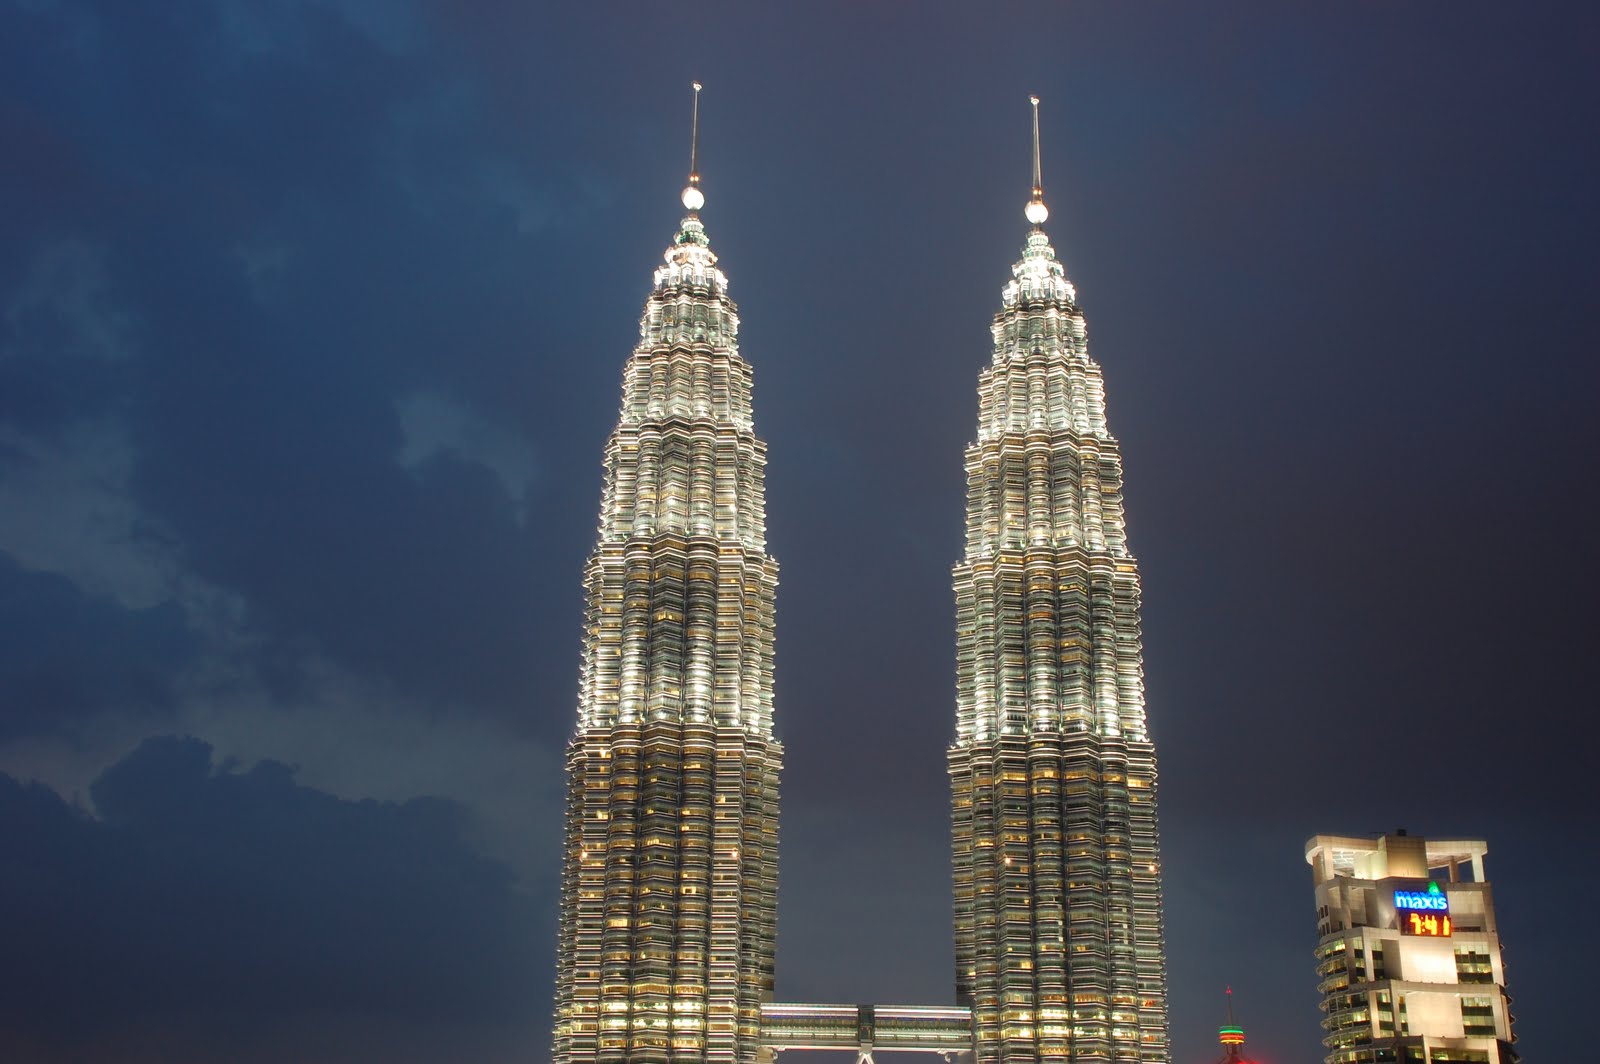 twin towers images |Daily Pictures